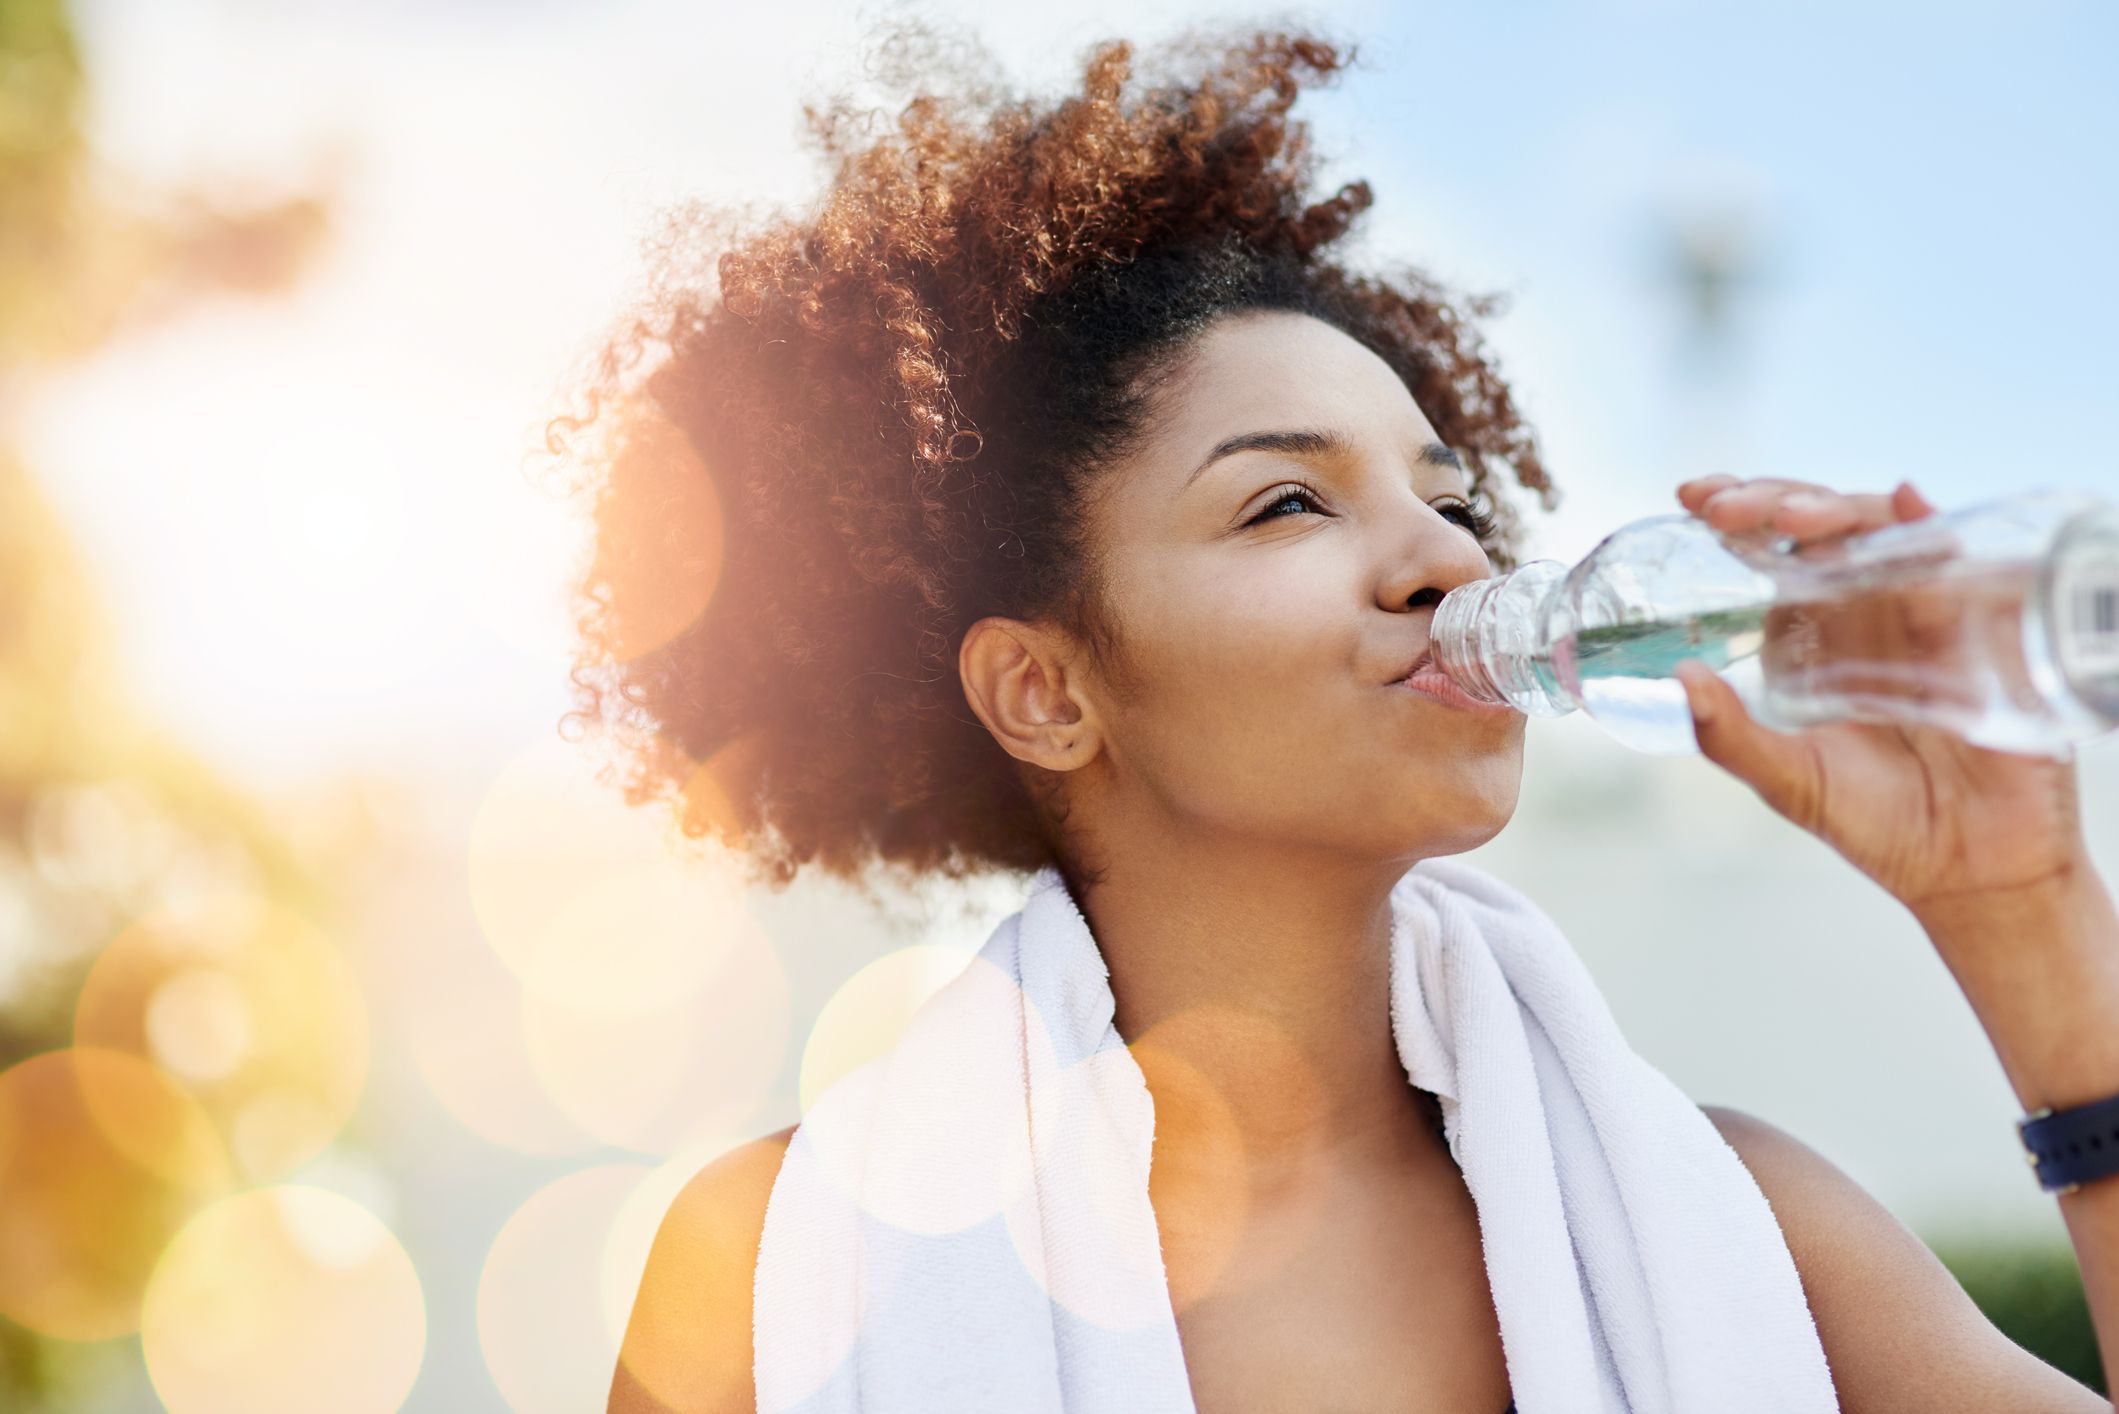 13 Easy Ways To Drink More Water Every Day